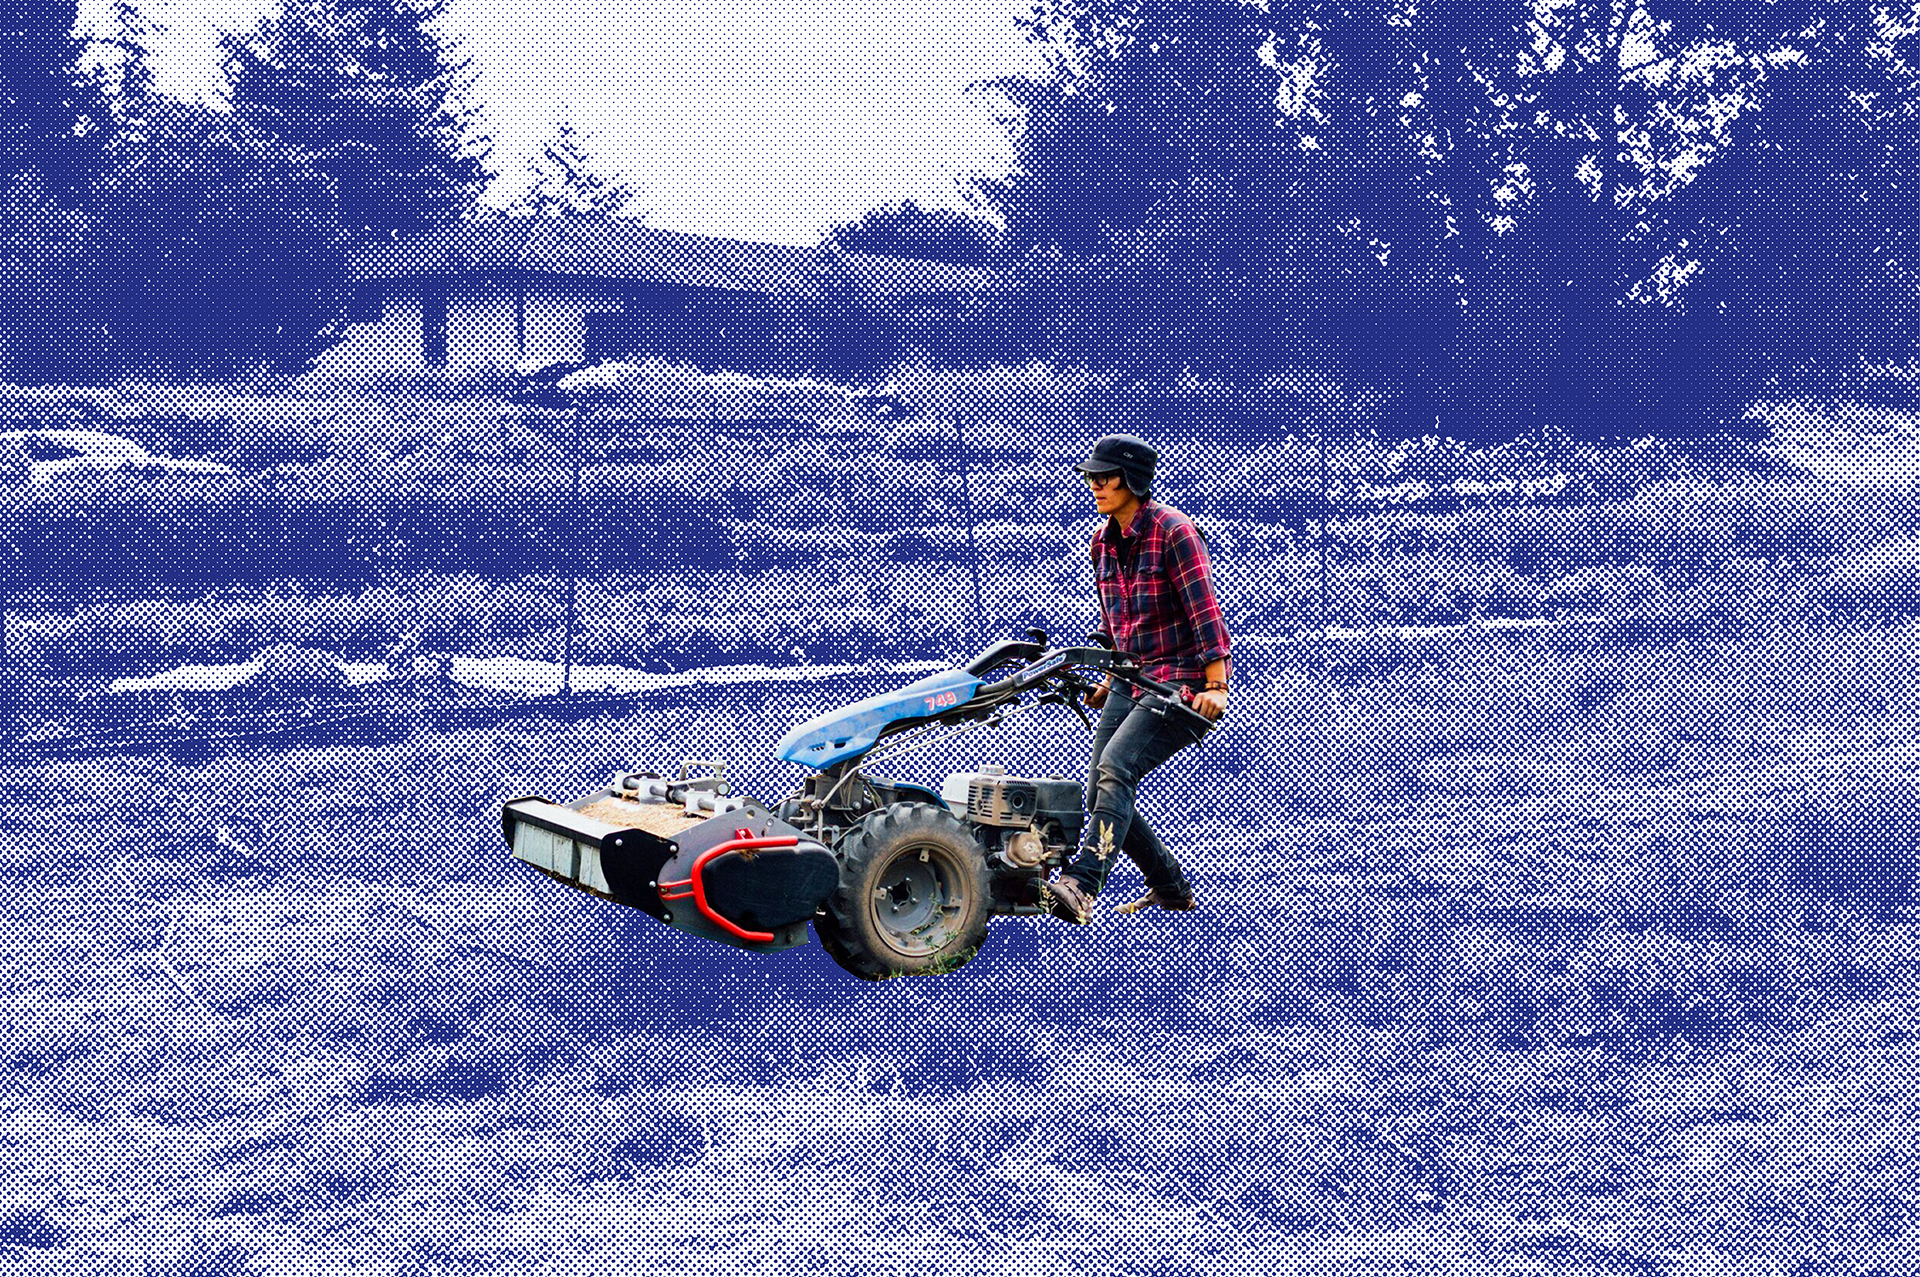 Leslie Wiser pushes a plow in a field; the backdrop of the field is shaded blue.